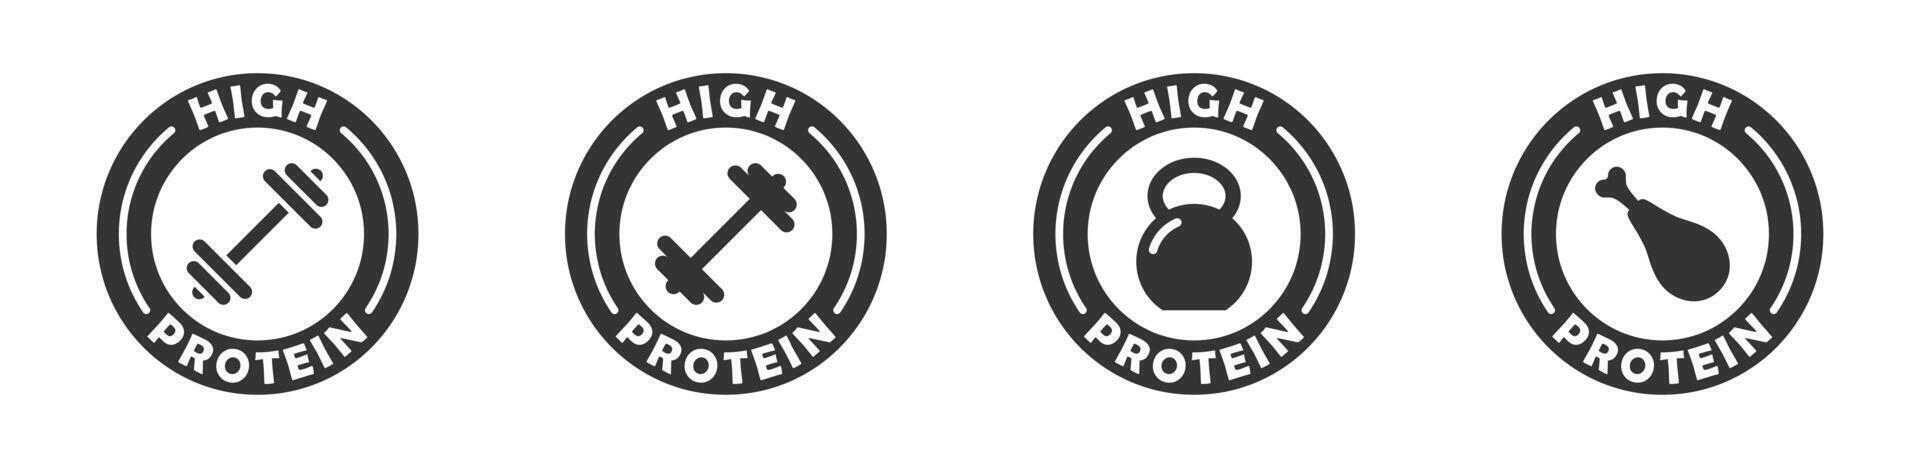 High protein icons set. Flat vector illustration.